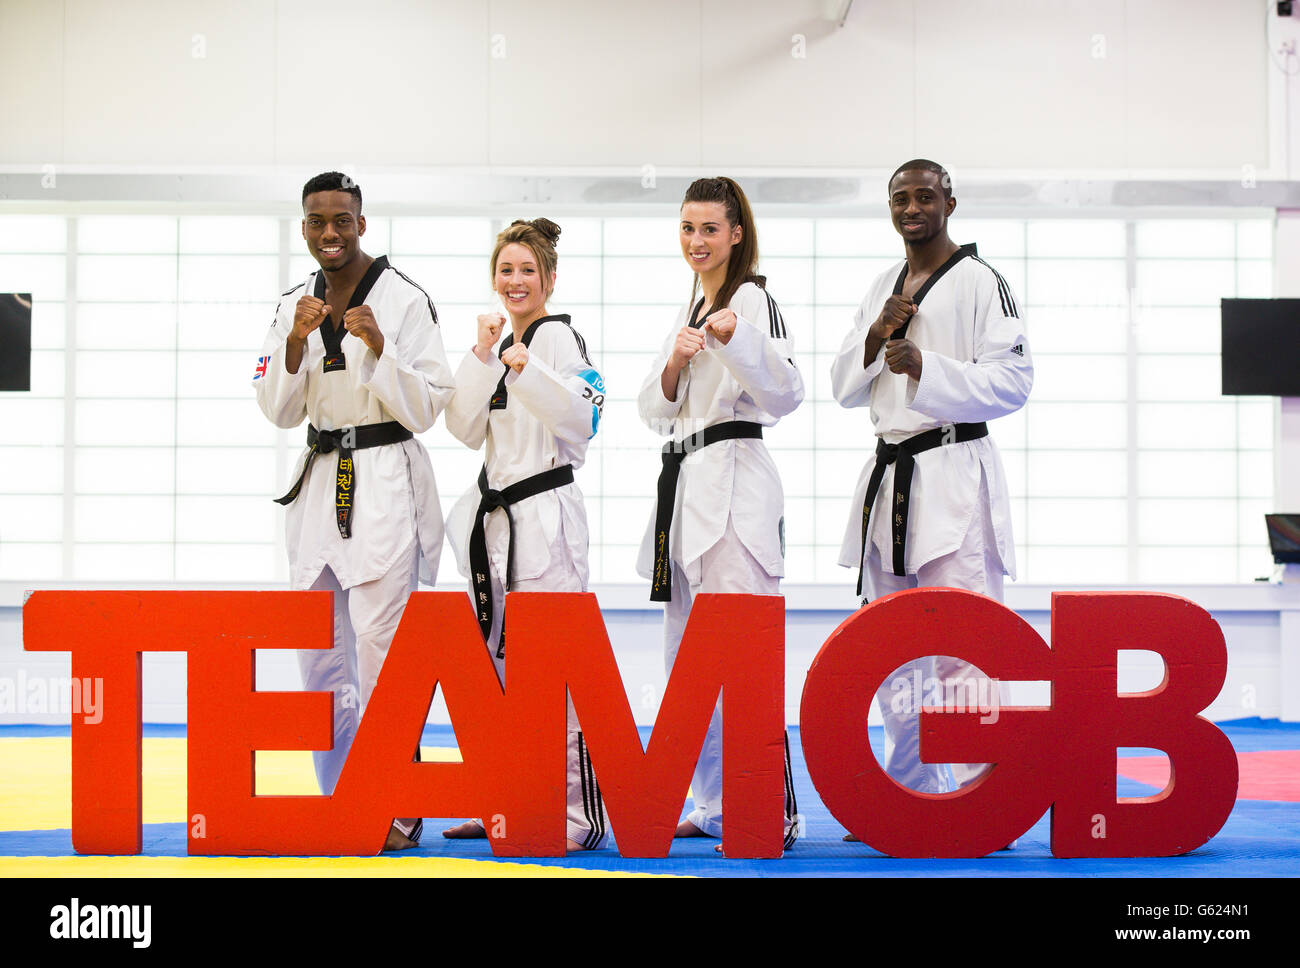 (From left to right) Lutalo Muhammad, Jade Jones, Bianca Walkden and Mahama Cho during the team announcement at the National Taekwondo Centre, Manchester. PRESS ASSOCIATION Photo. Picture date: Wednesday June 22, 2016. See PA story TAEKWONDO Olympics Team GB. Photo credit should read: Barrington Coombs/PA Wire Stock Photo